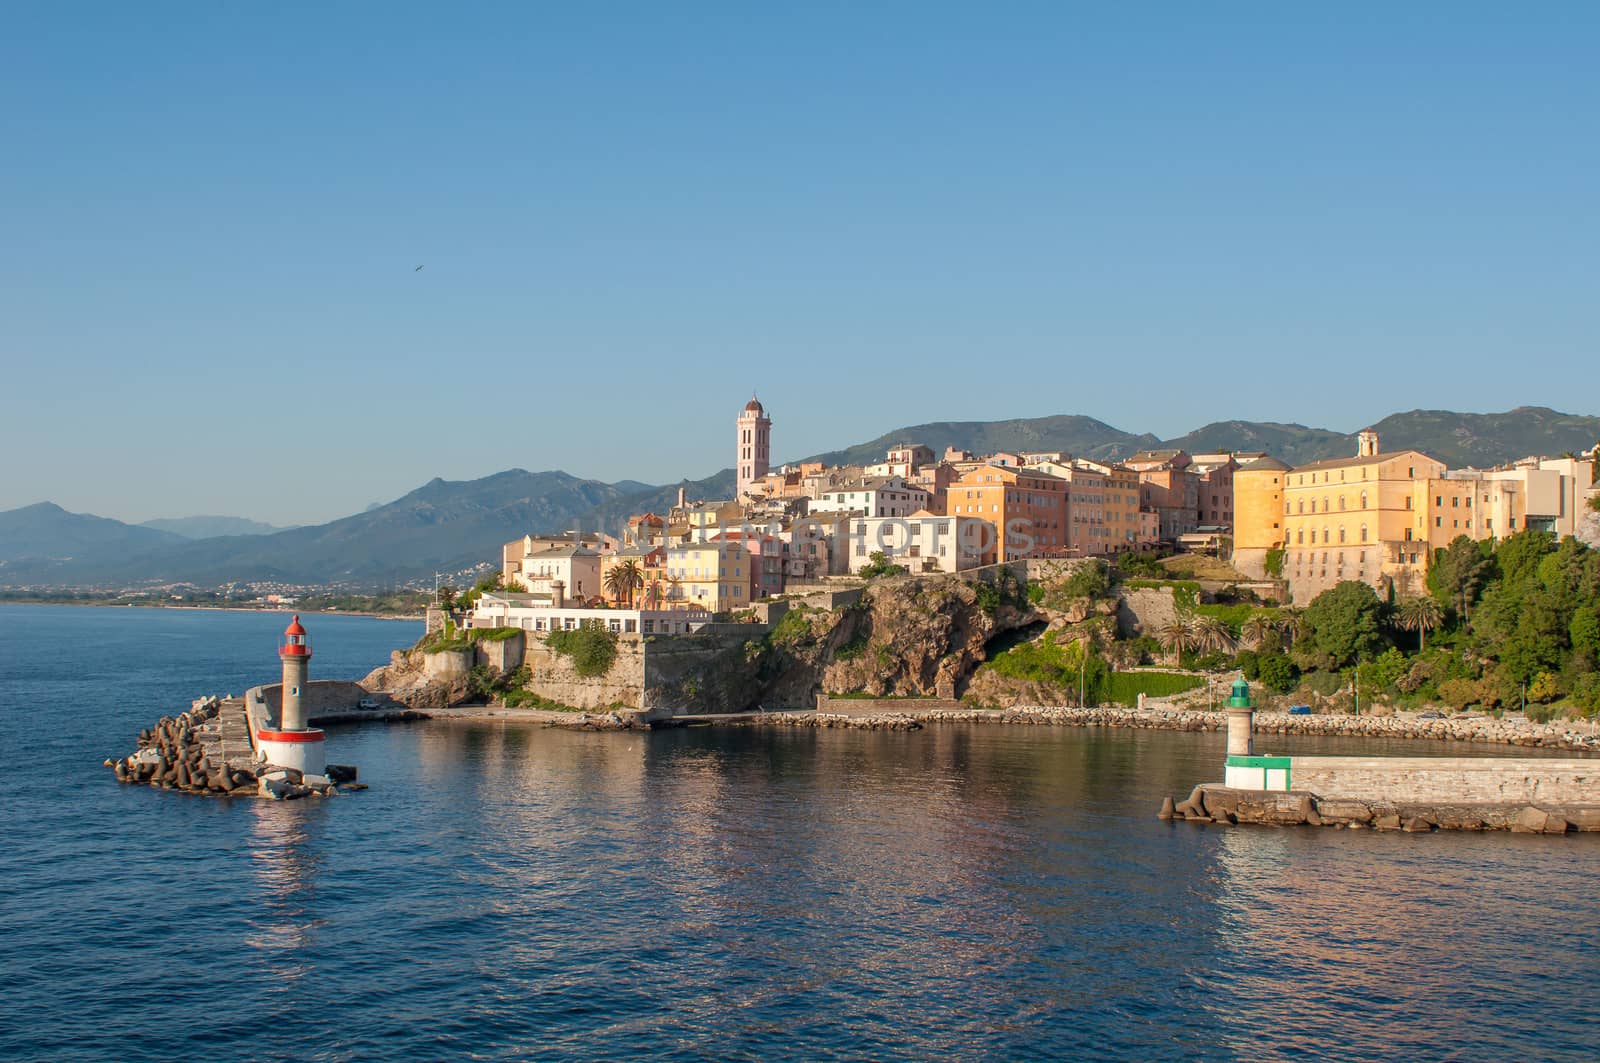 port of Bastia early in the morning in Corsica. The sea is calm, two lighthouses and the city of Bastia in the background